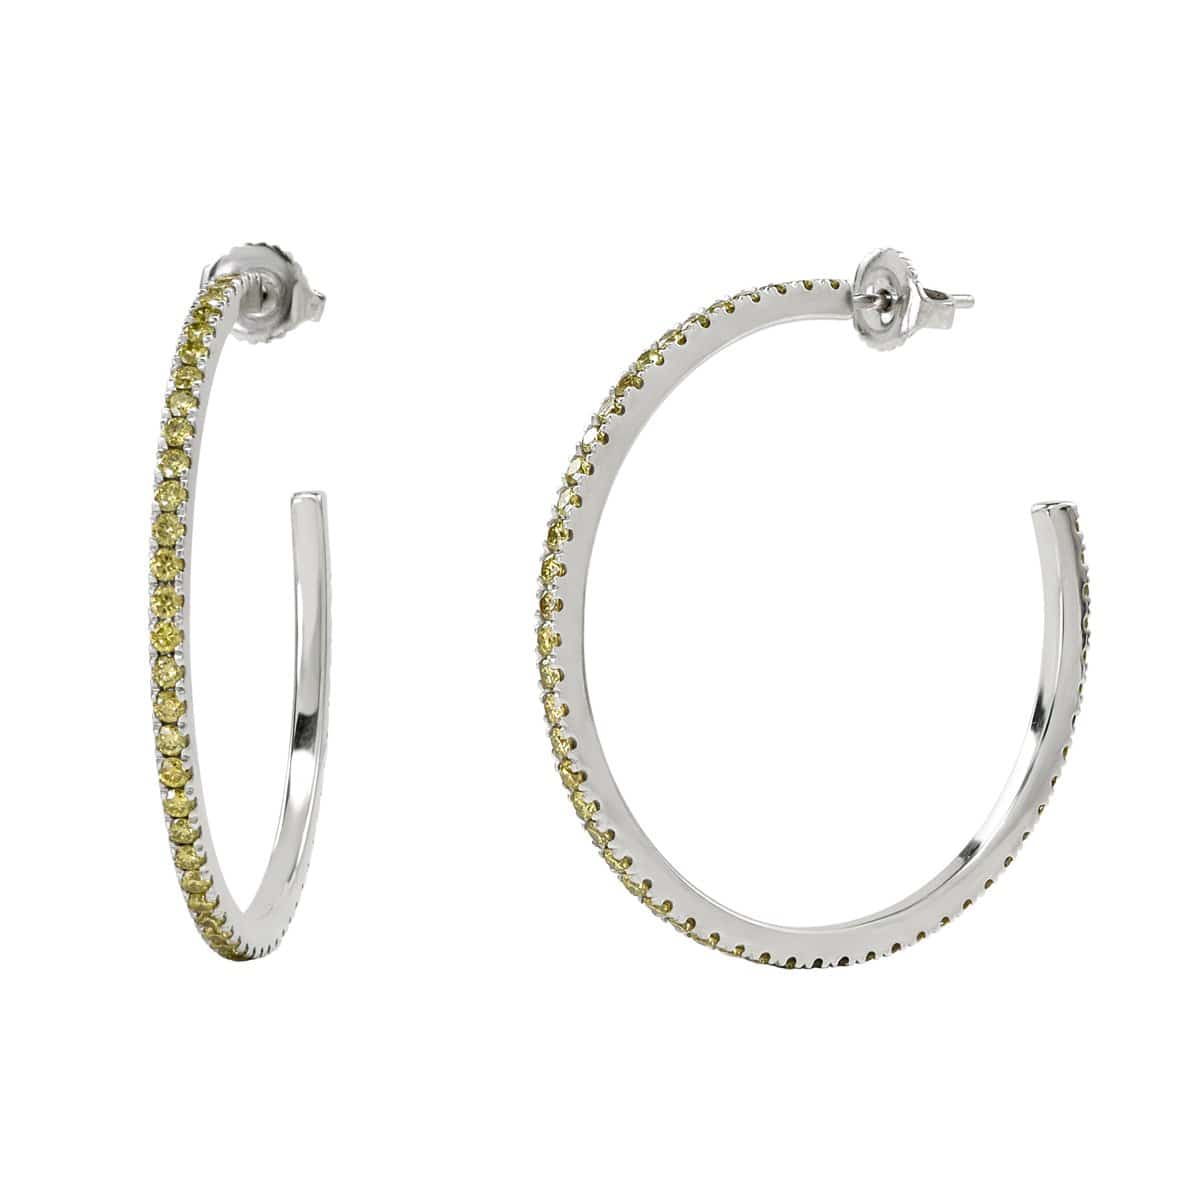 The AX-Party Hoops | Yellow Diamonds & White Gold Earrings